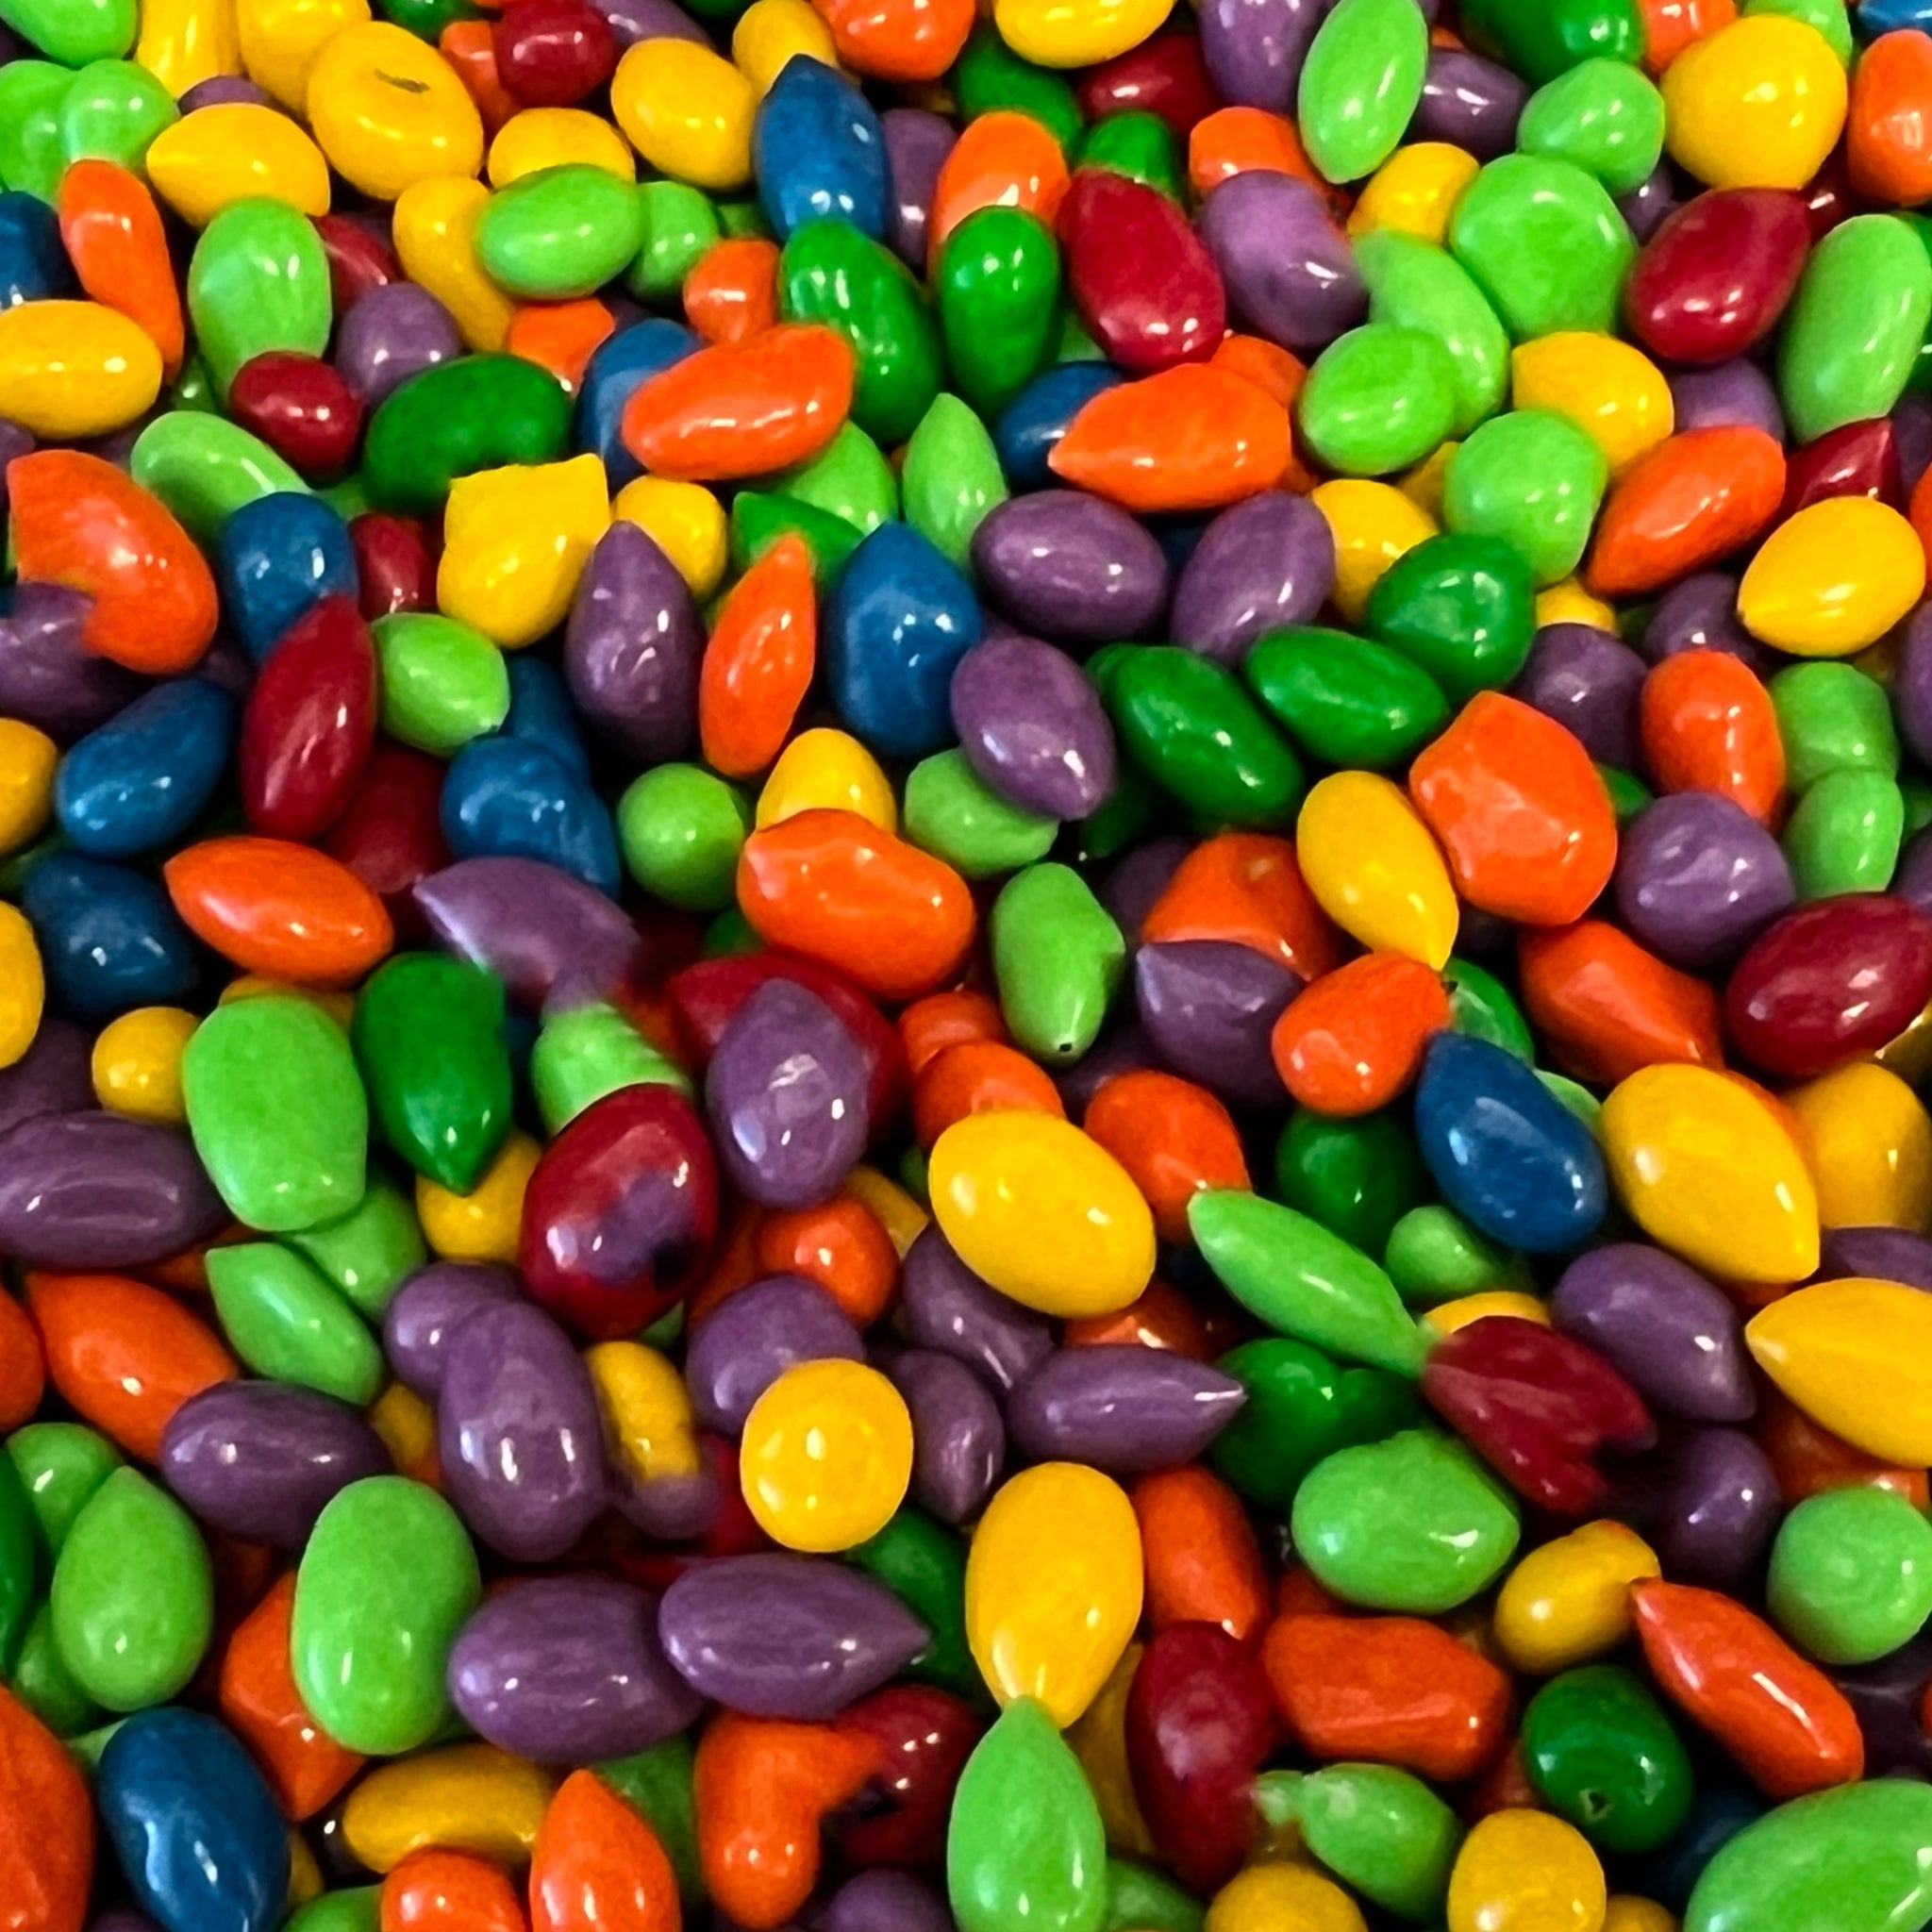 Rainbow colored candy coating over suflower seeds 